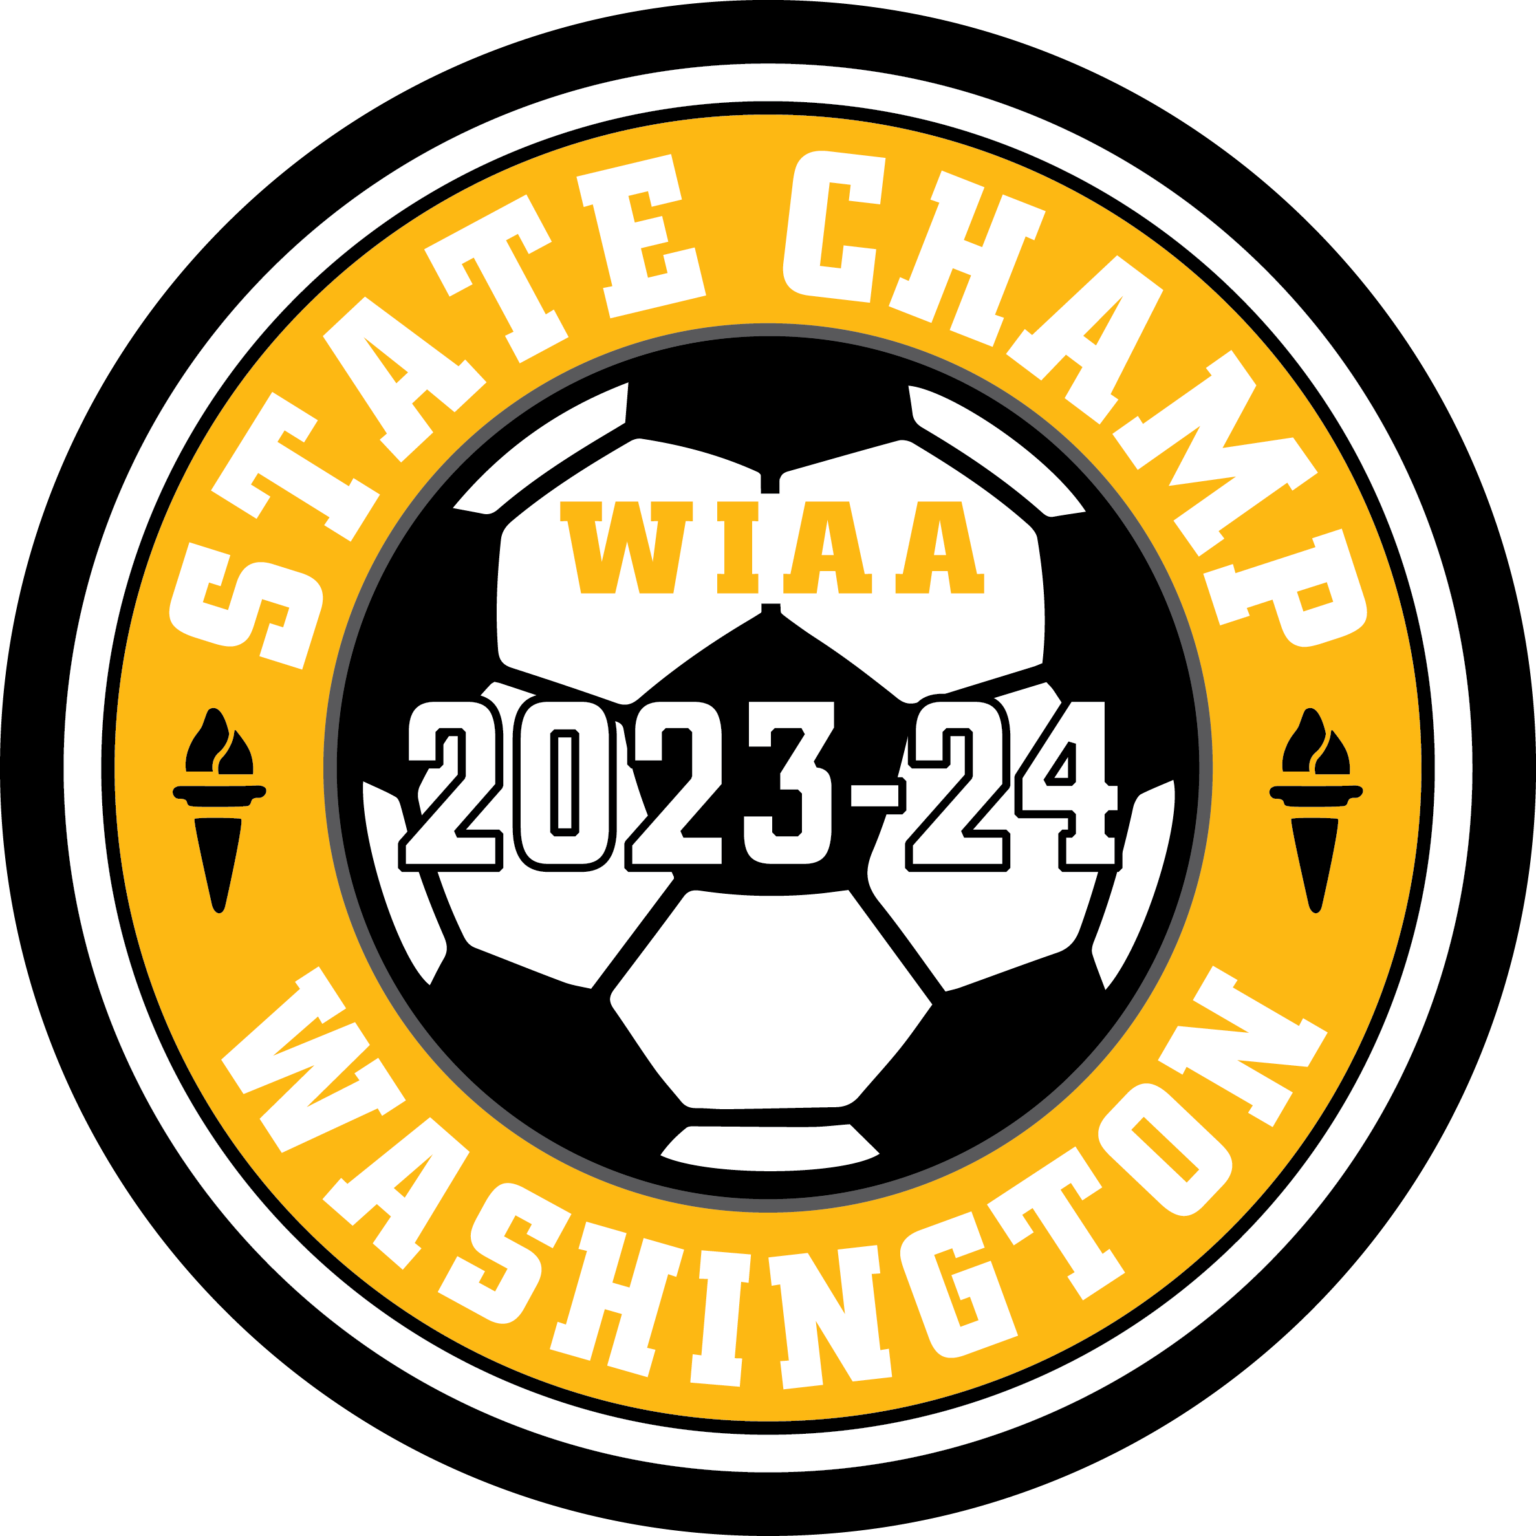 2023 24 WIAA State Soccer Champions Letterman Patch